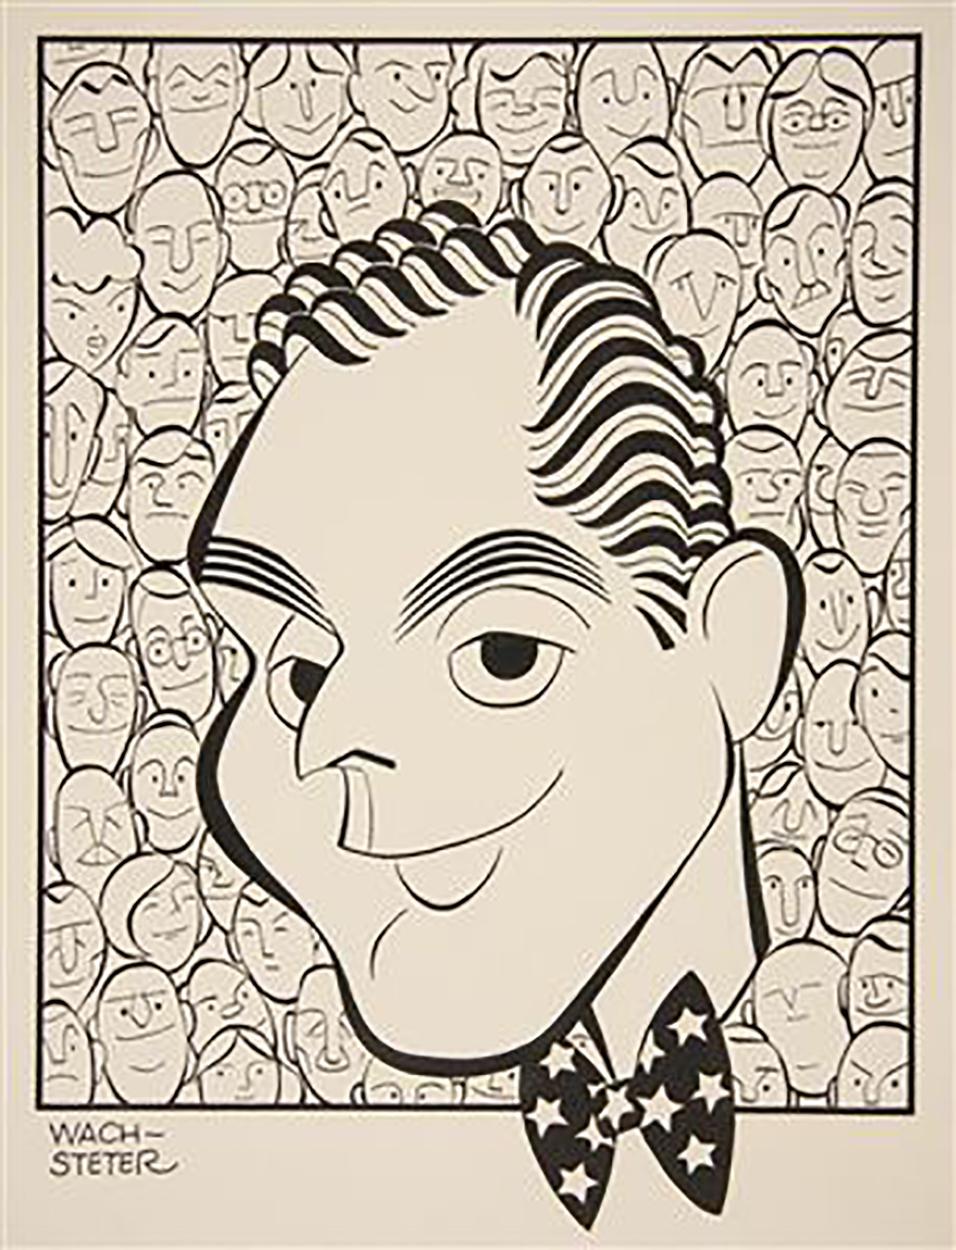 George Wachsteter Figurative Art - Caricature for NBC-TV Host Dan Seymour, for September 1951, "We the People"